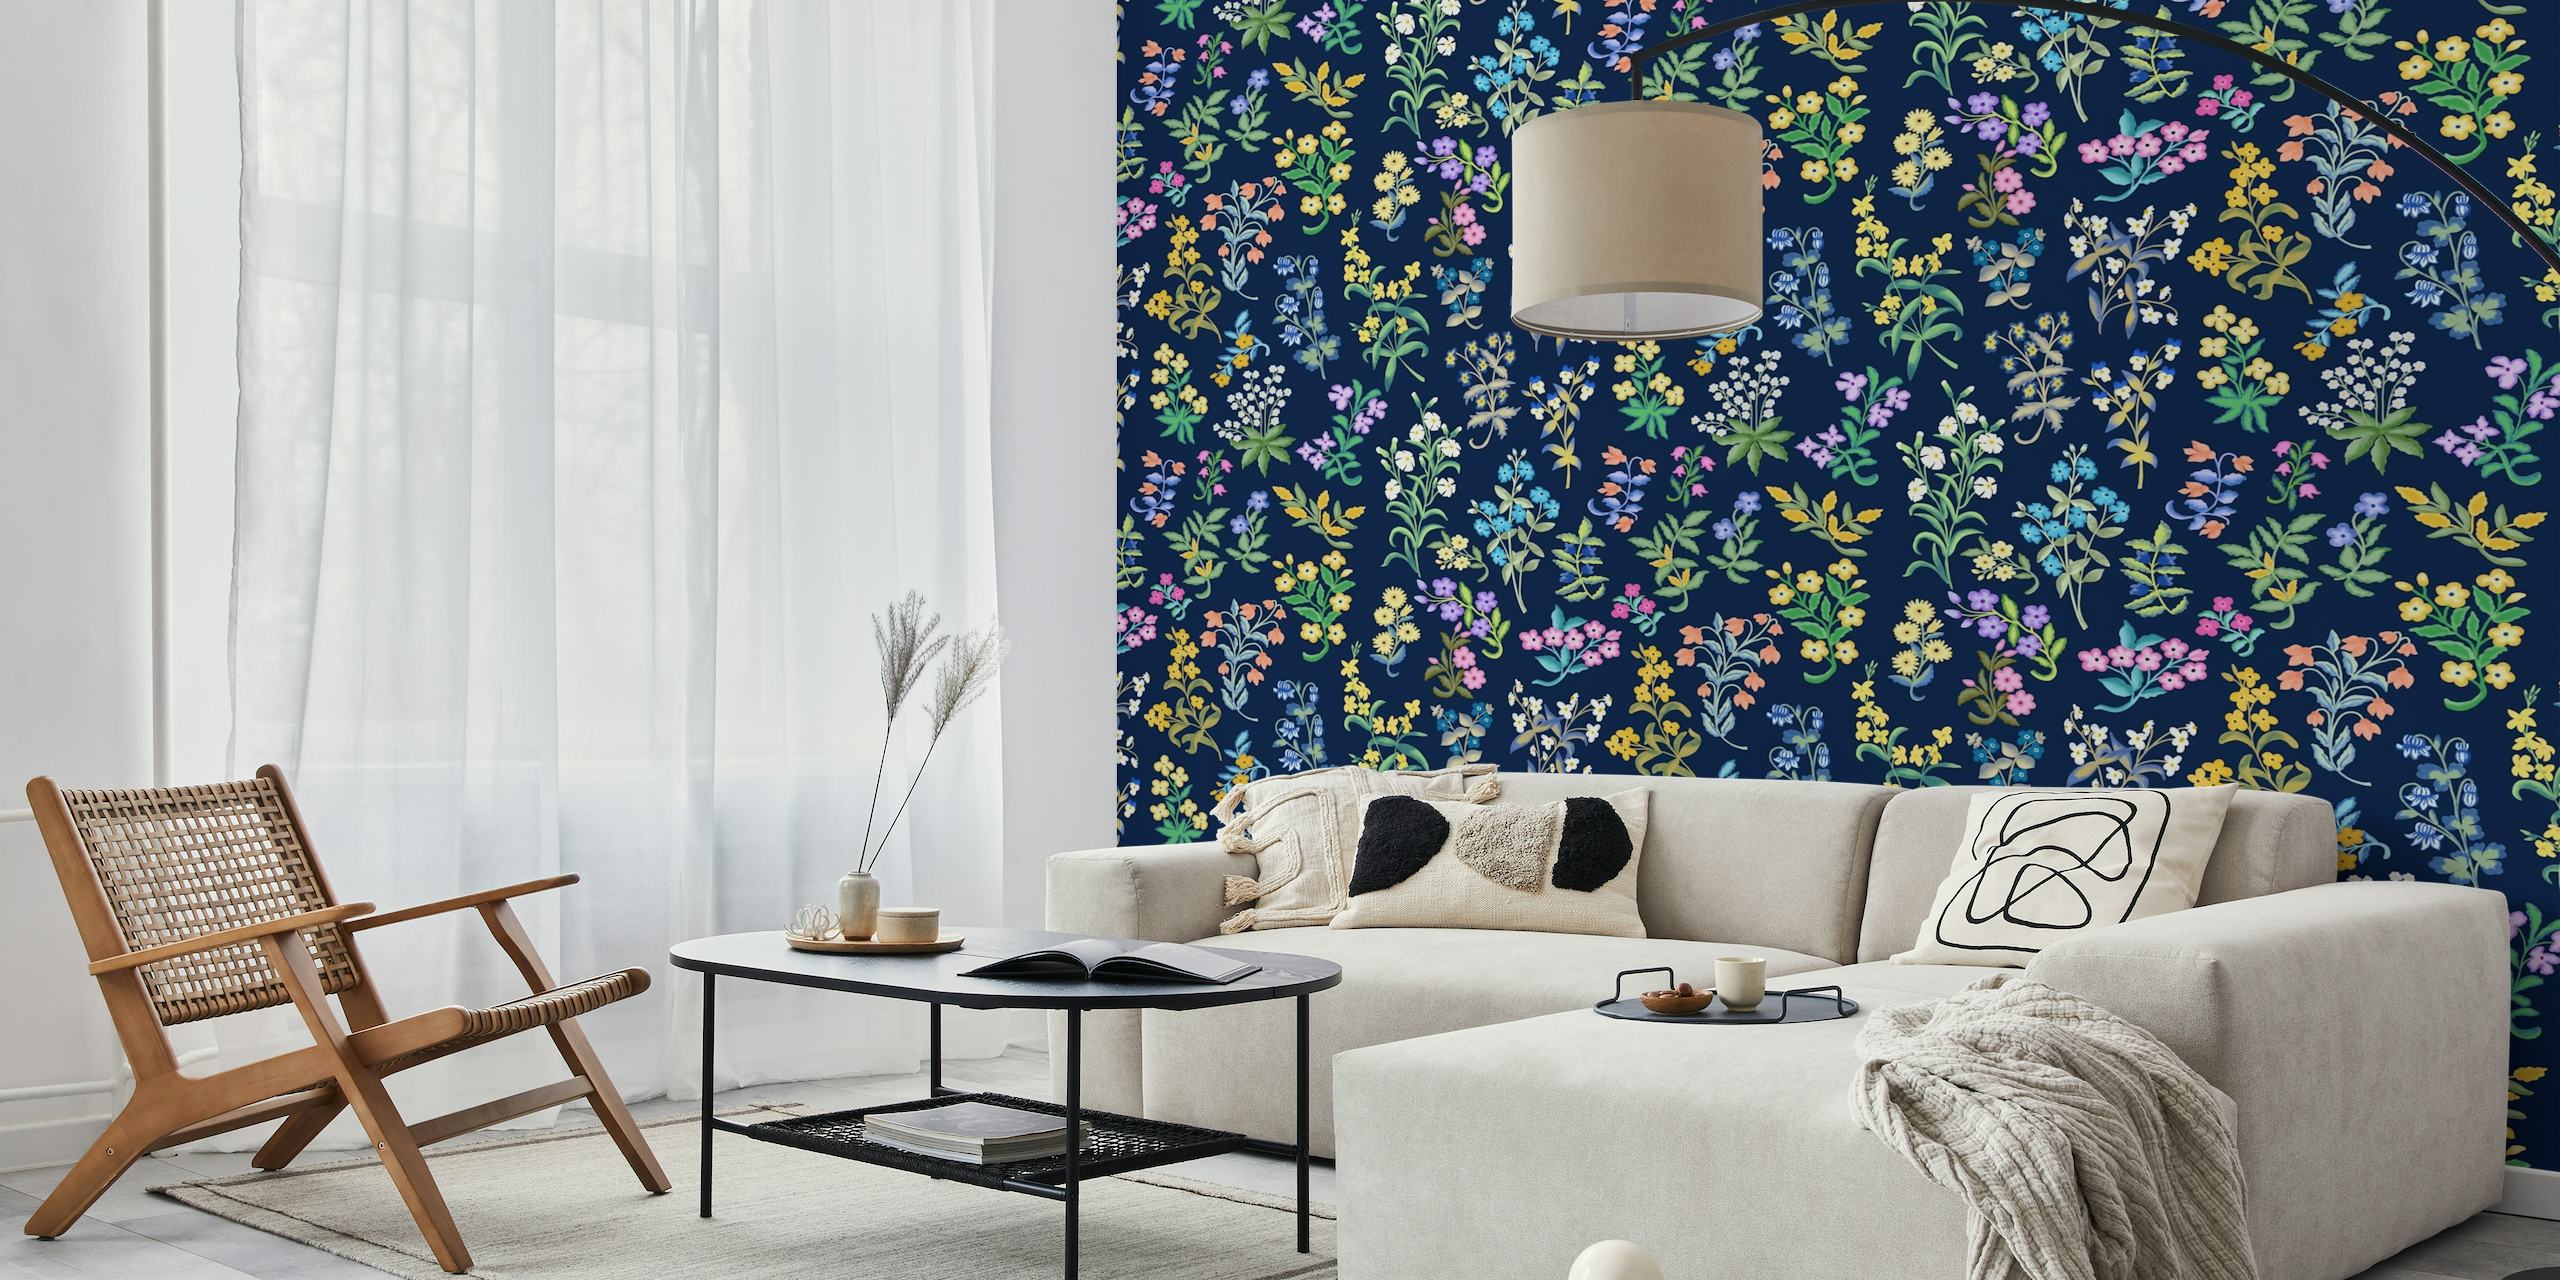 Millefleurs pattern with multicolored flowers on a dark blue background wall mural